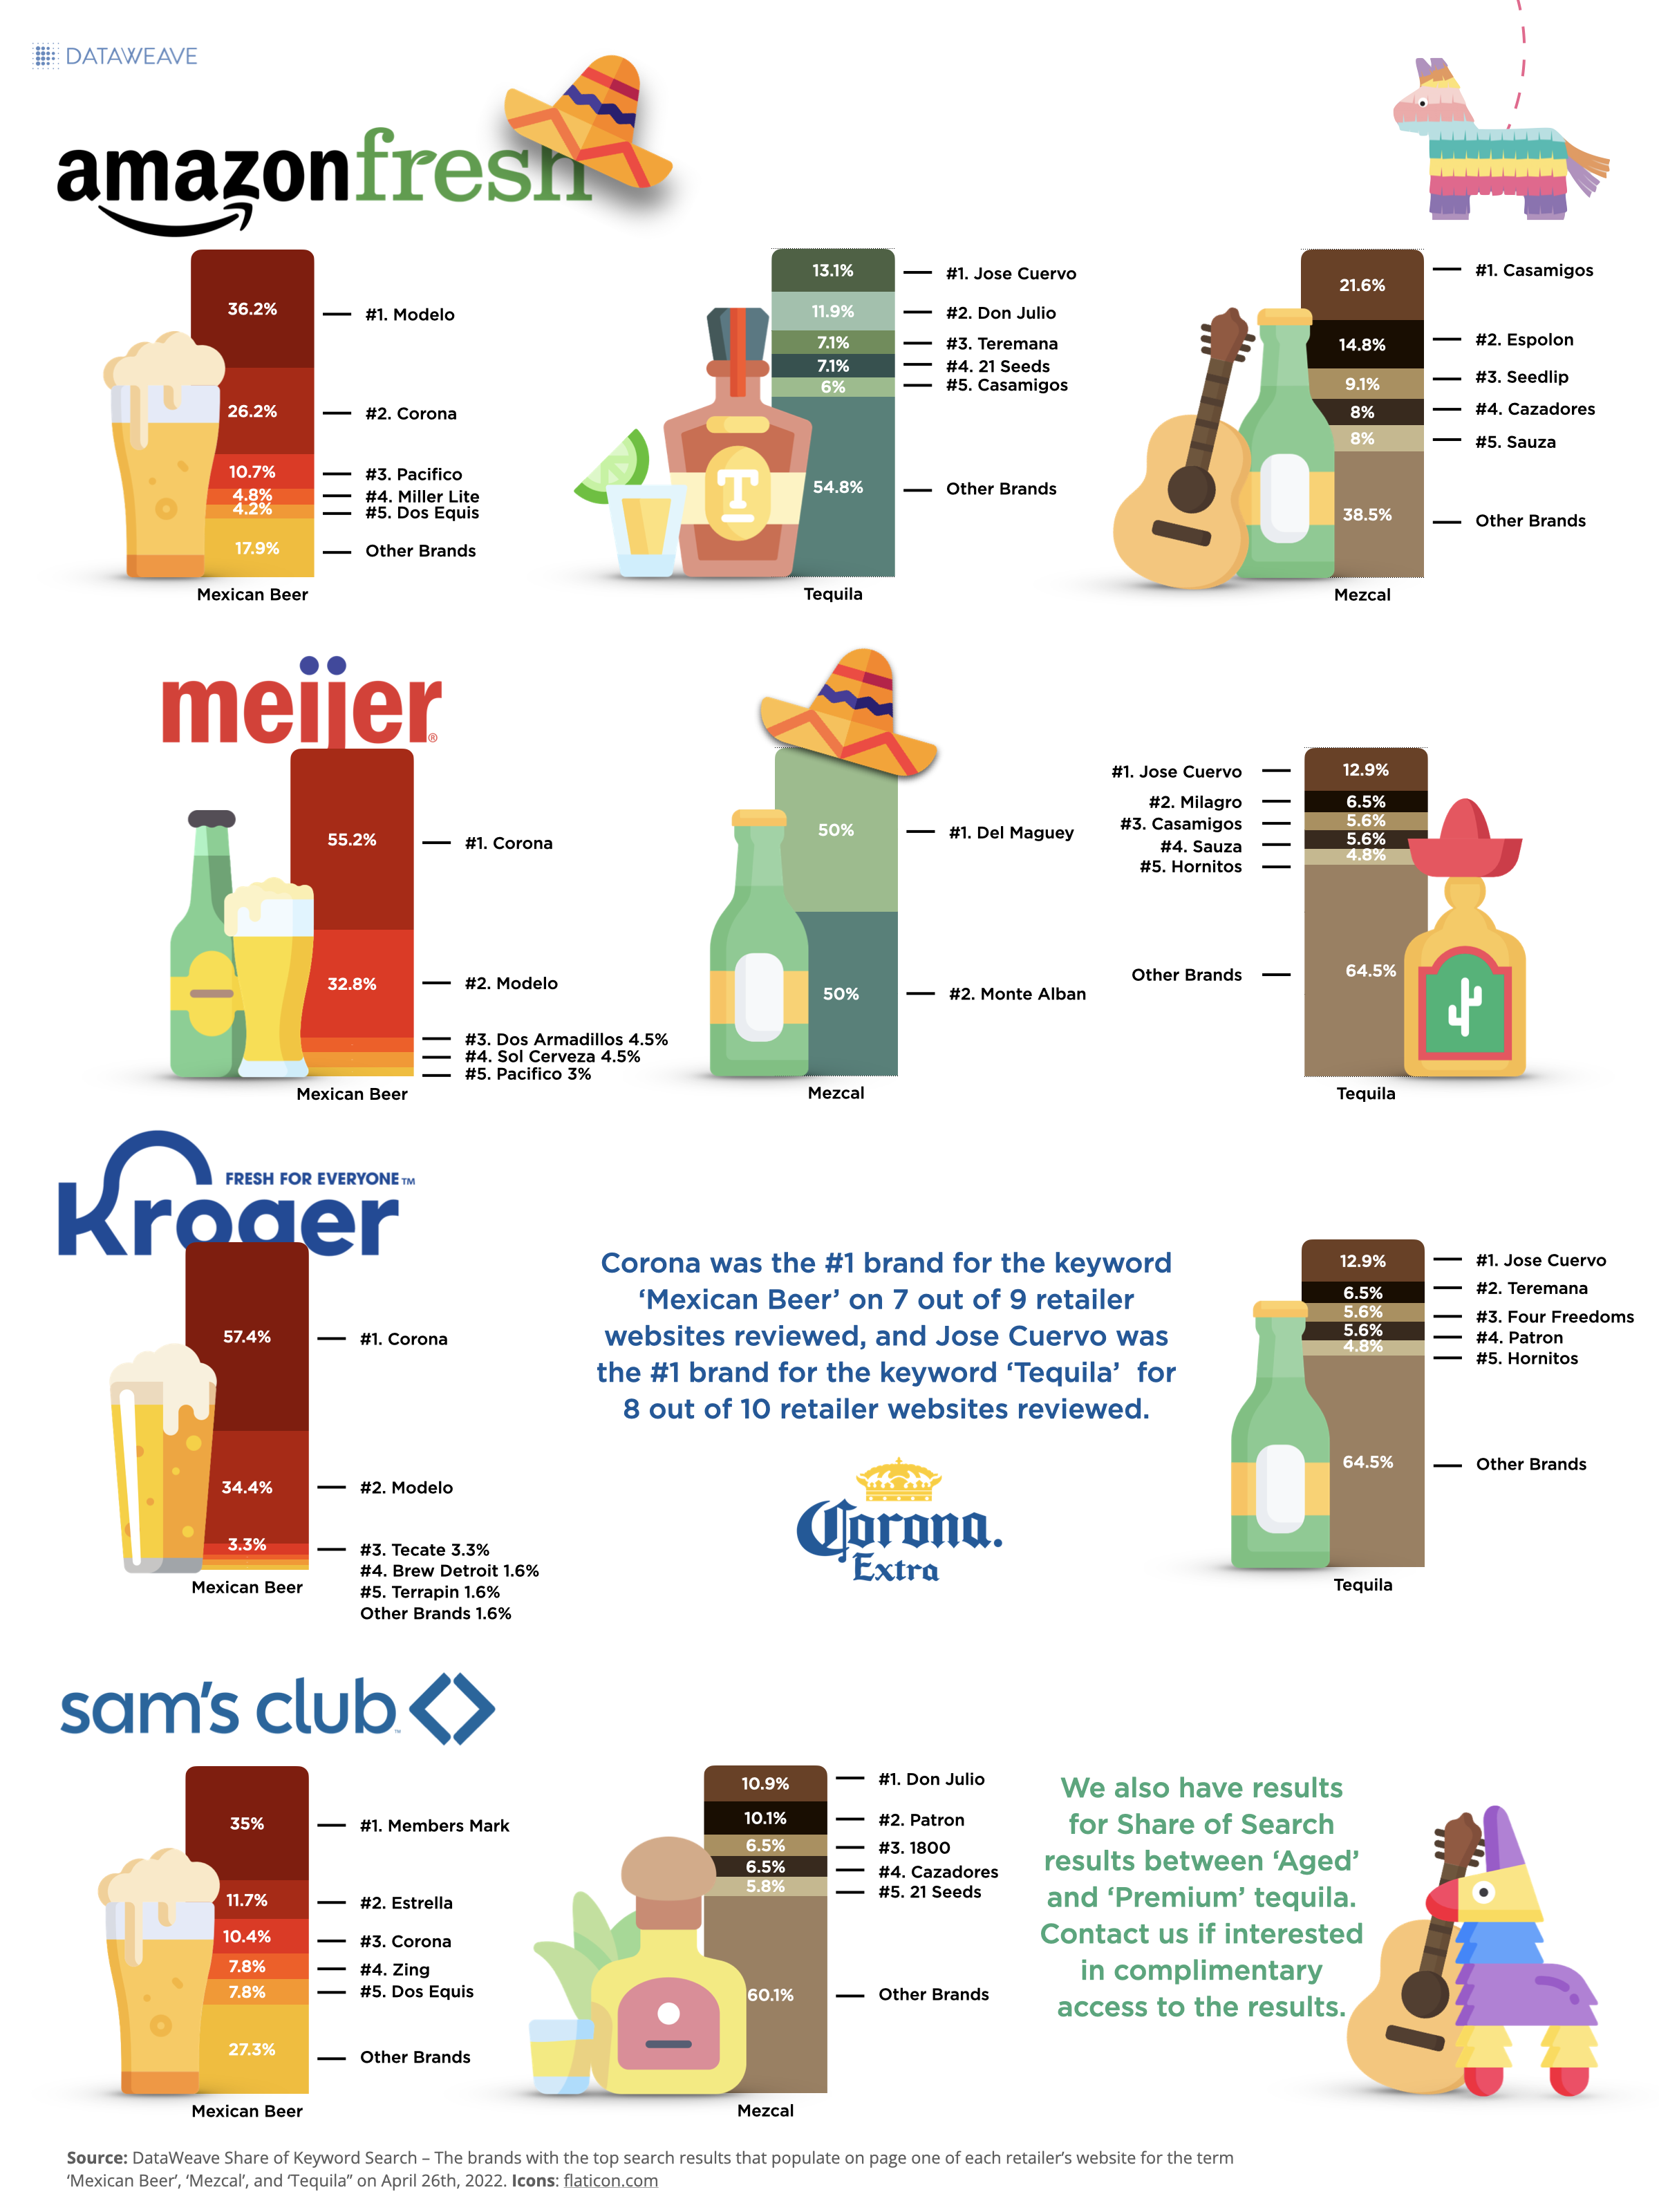 AmazonFresh, Meijer, Kroger, and Sam's Club Share of Search - Beer, Mezcal, and Tequila Keywords on Cinco de Mayo 2022